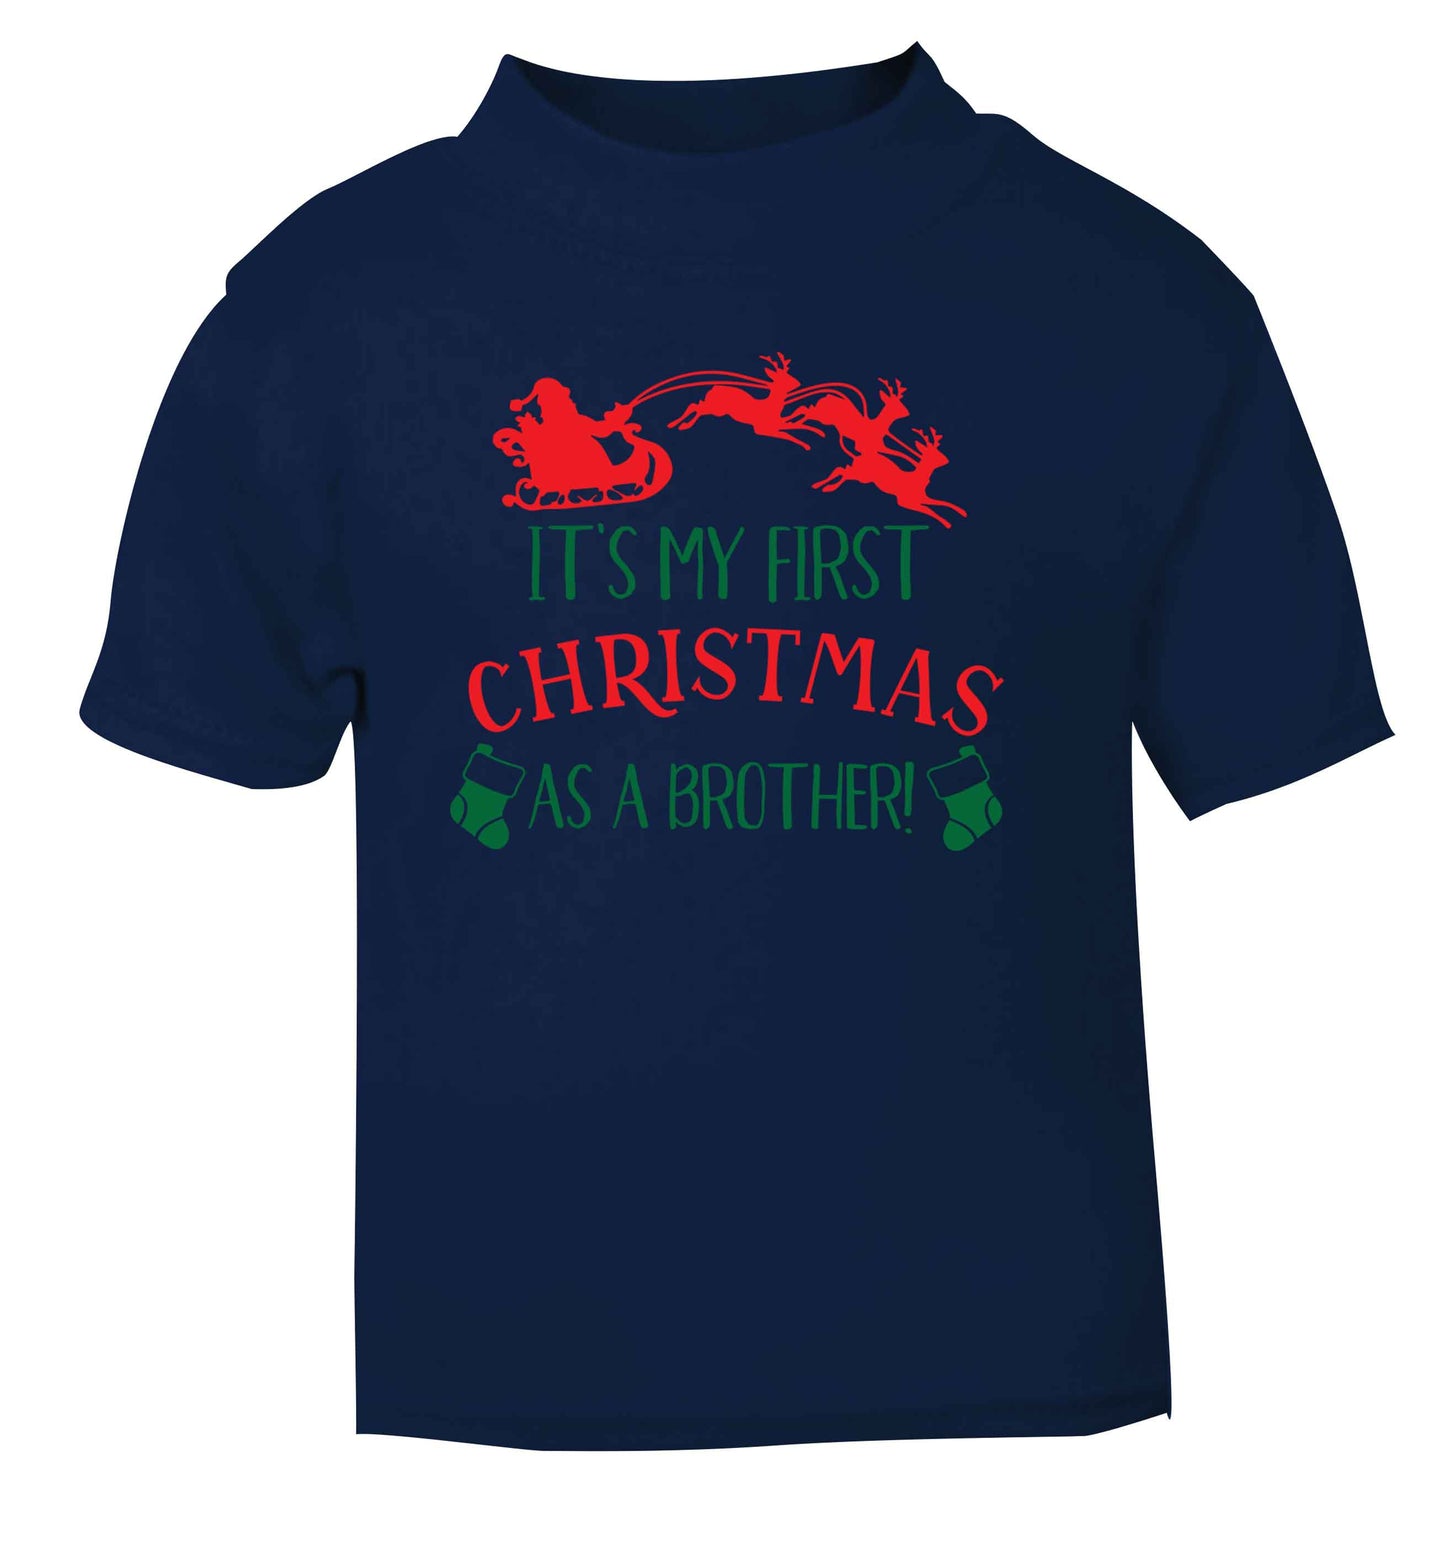 It's my first Christmas as a brother! navy Baby Toddler Tshirt 2 Years